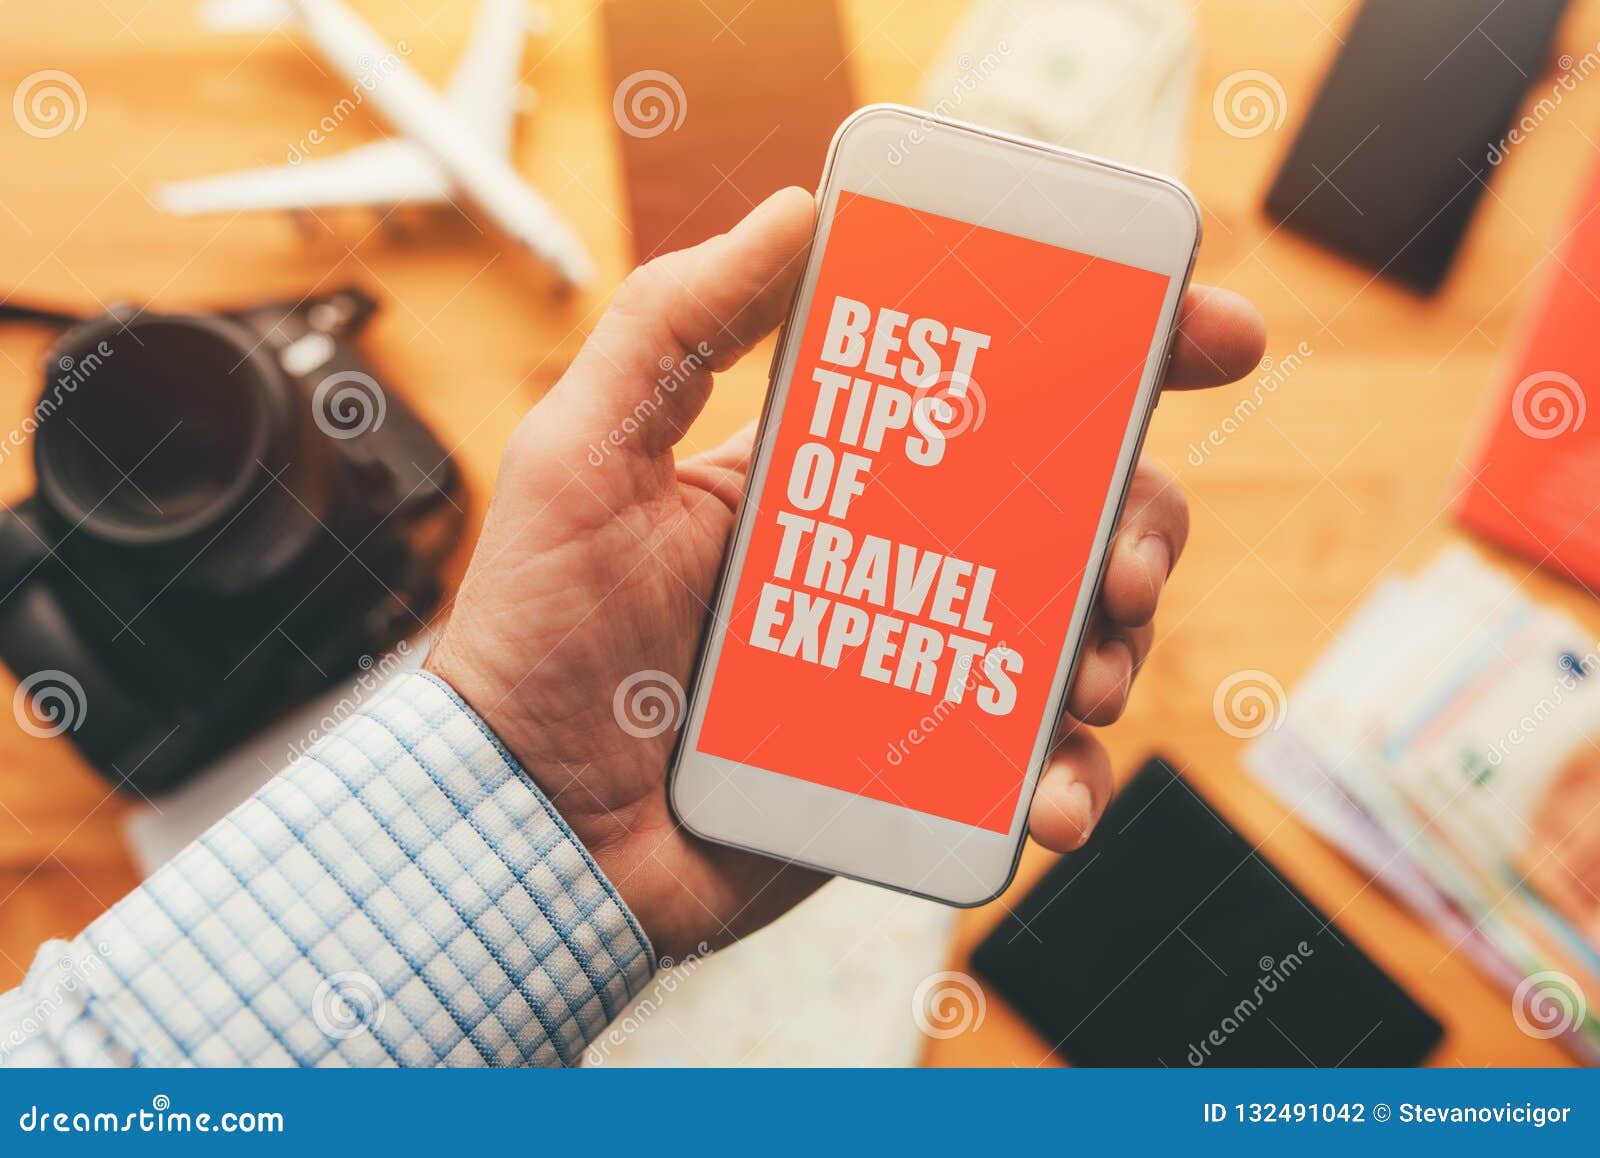 travel experts top tips